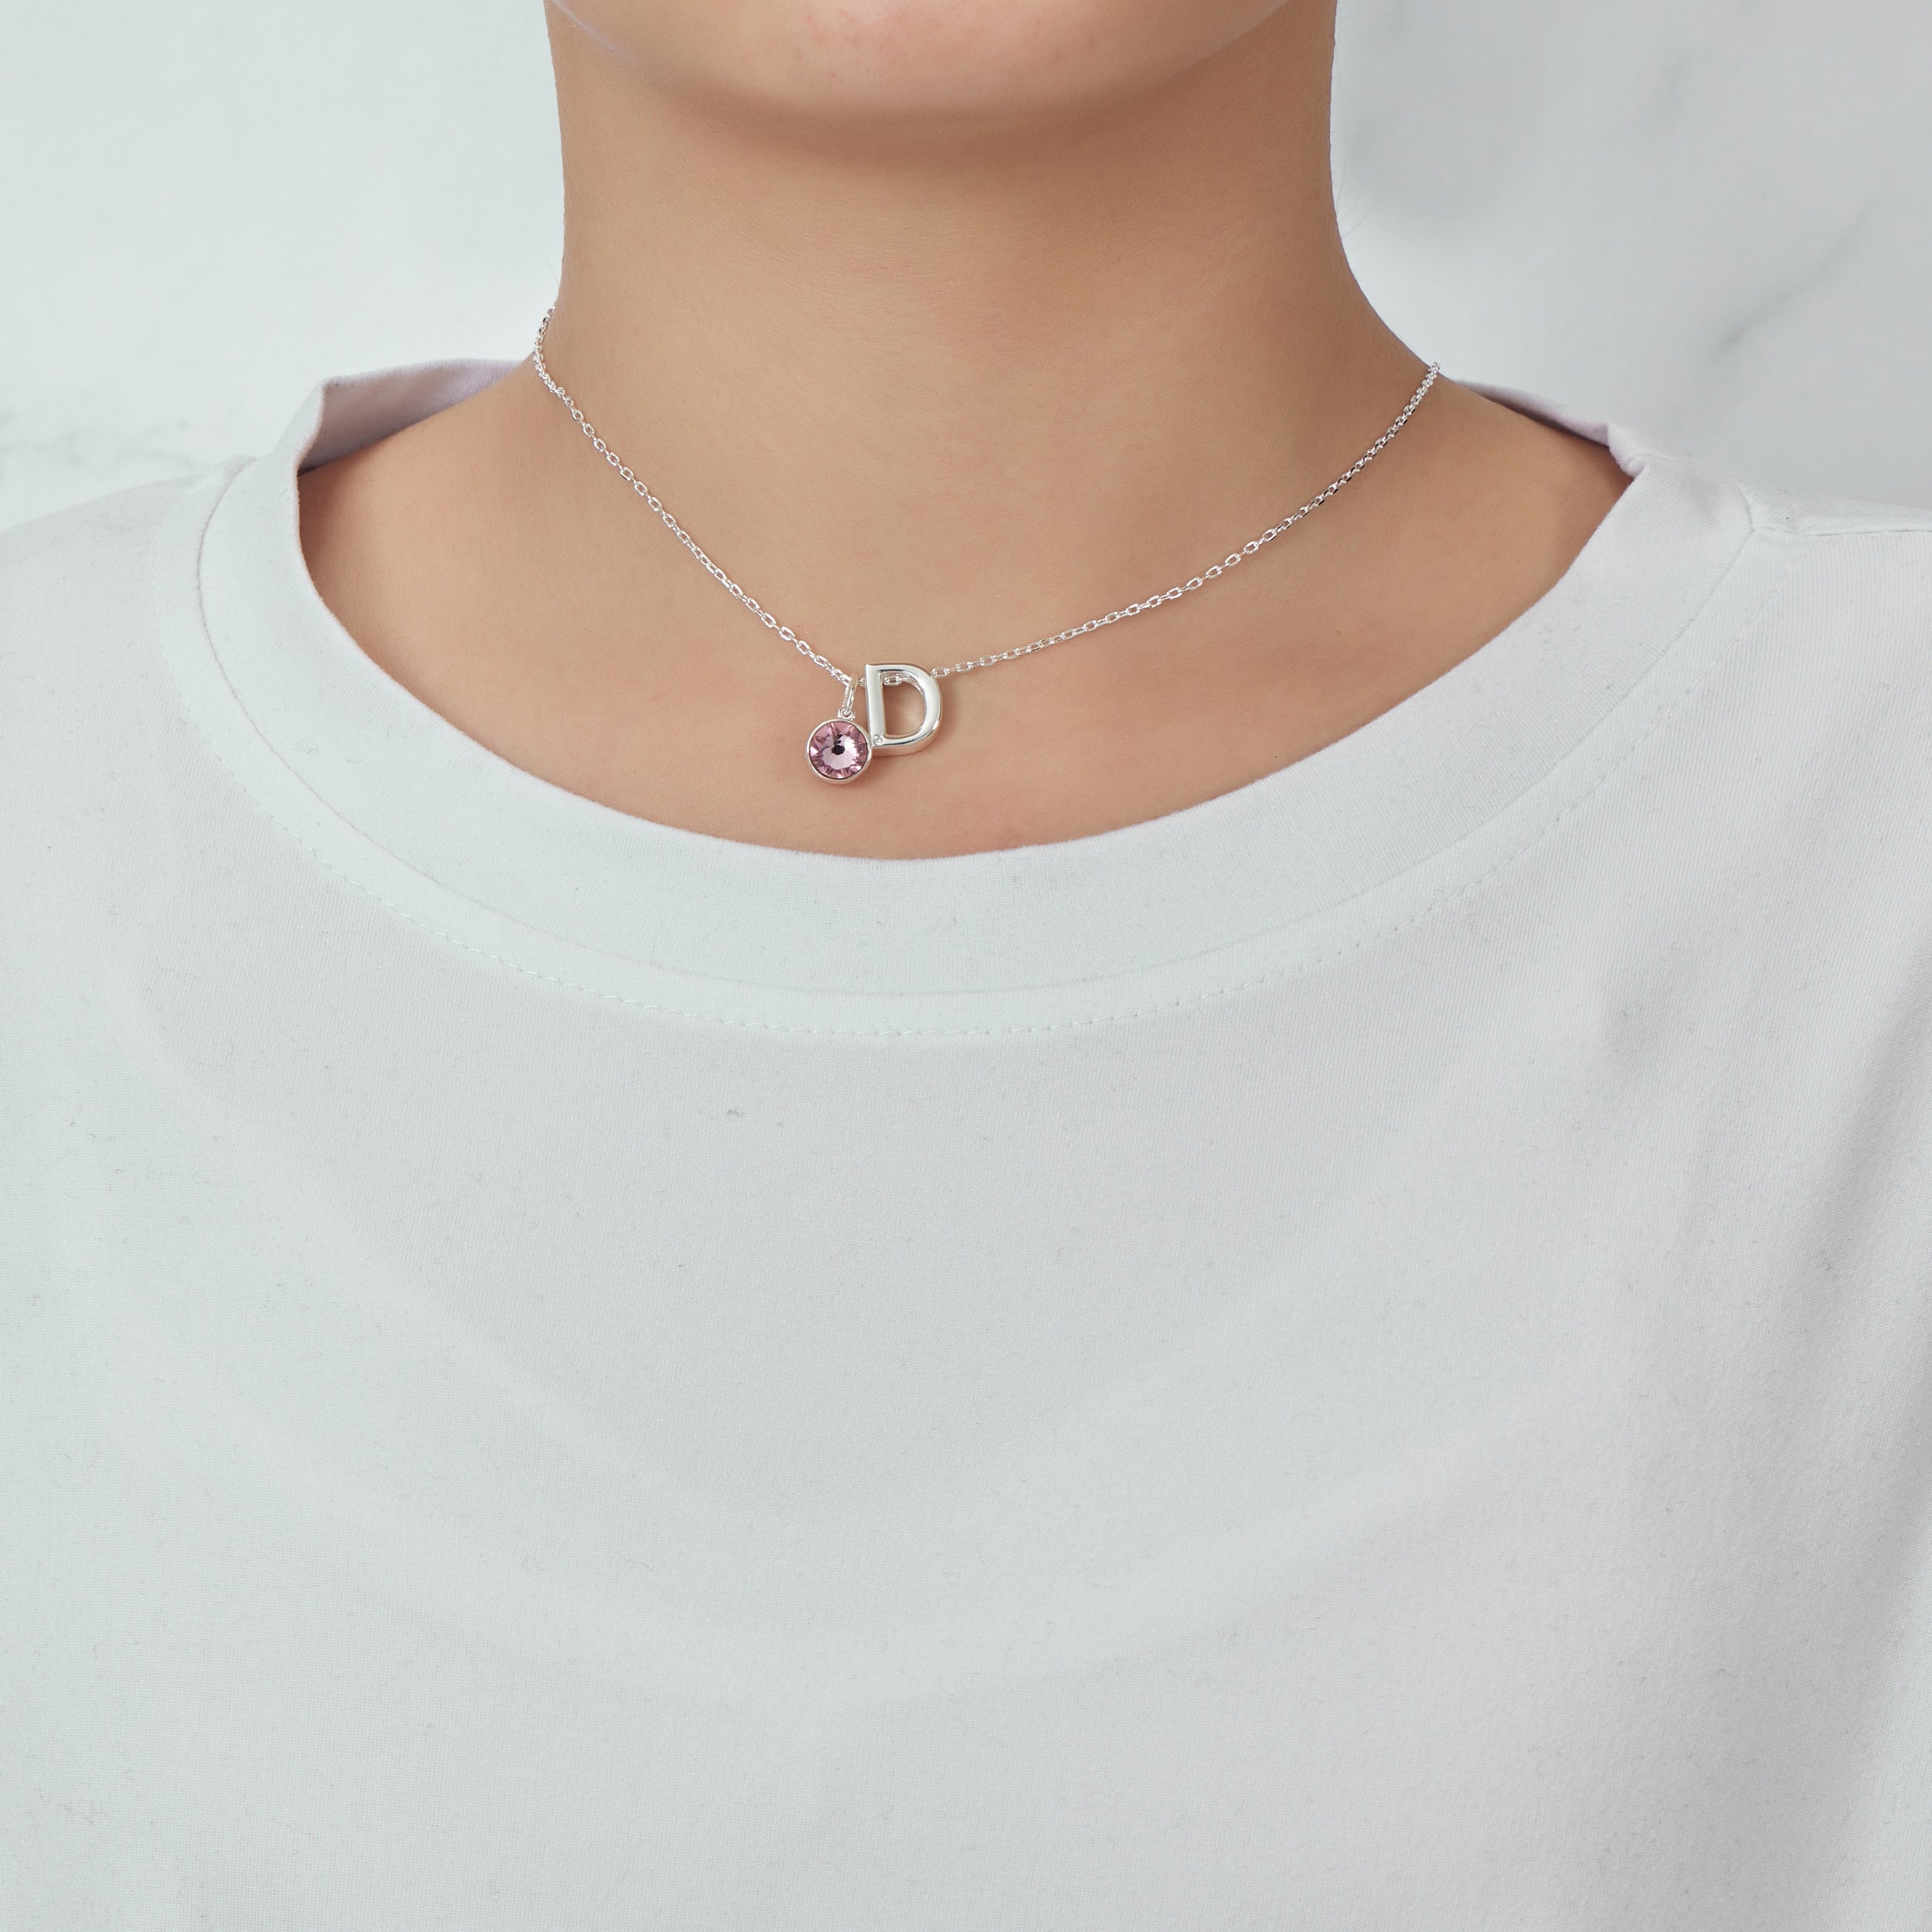 Initial D Necklace with Birthstone Charm Created with Zircondia® Crystals